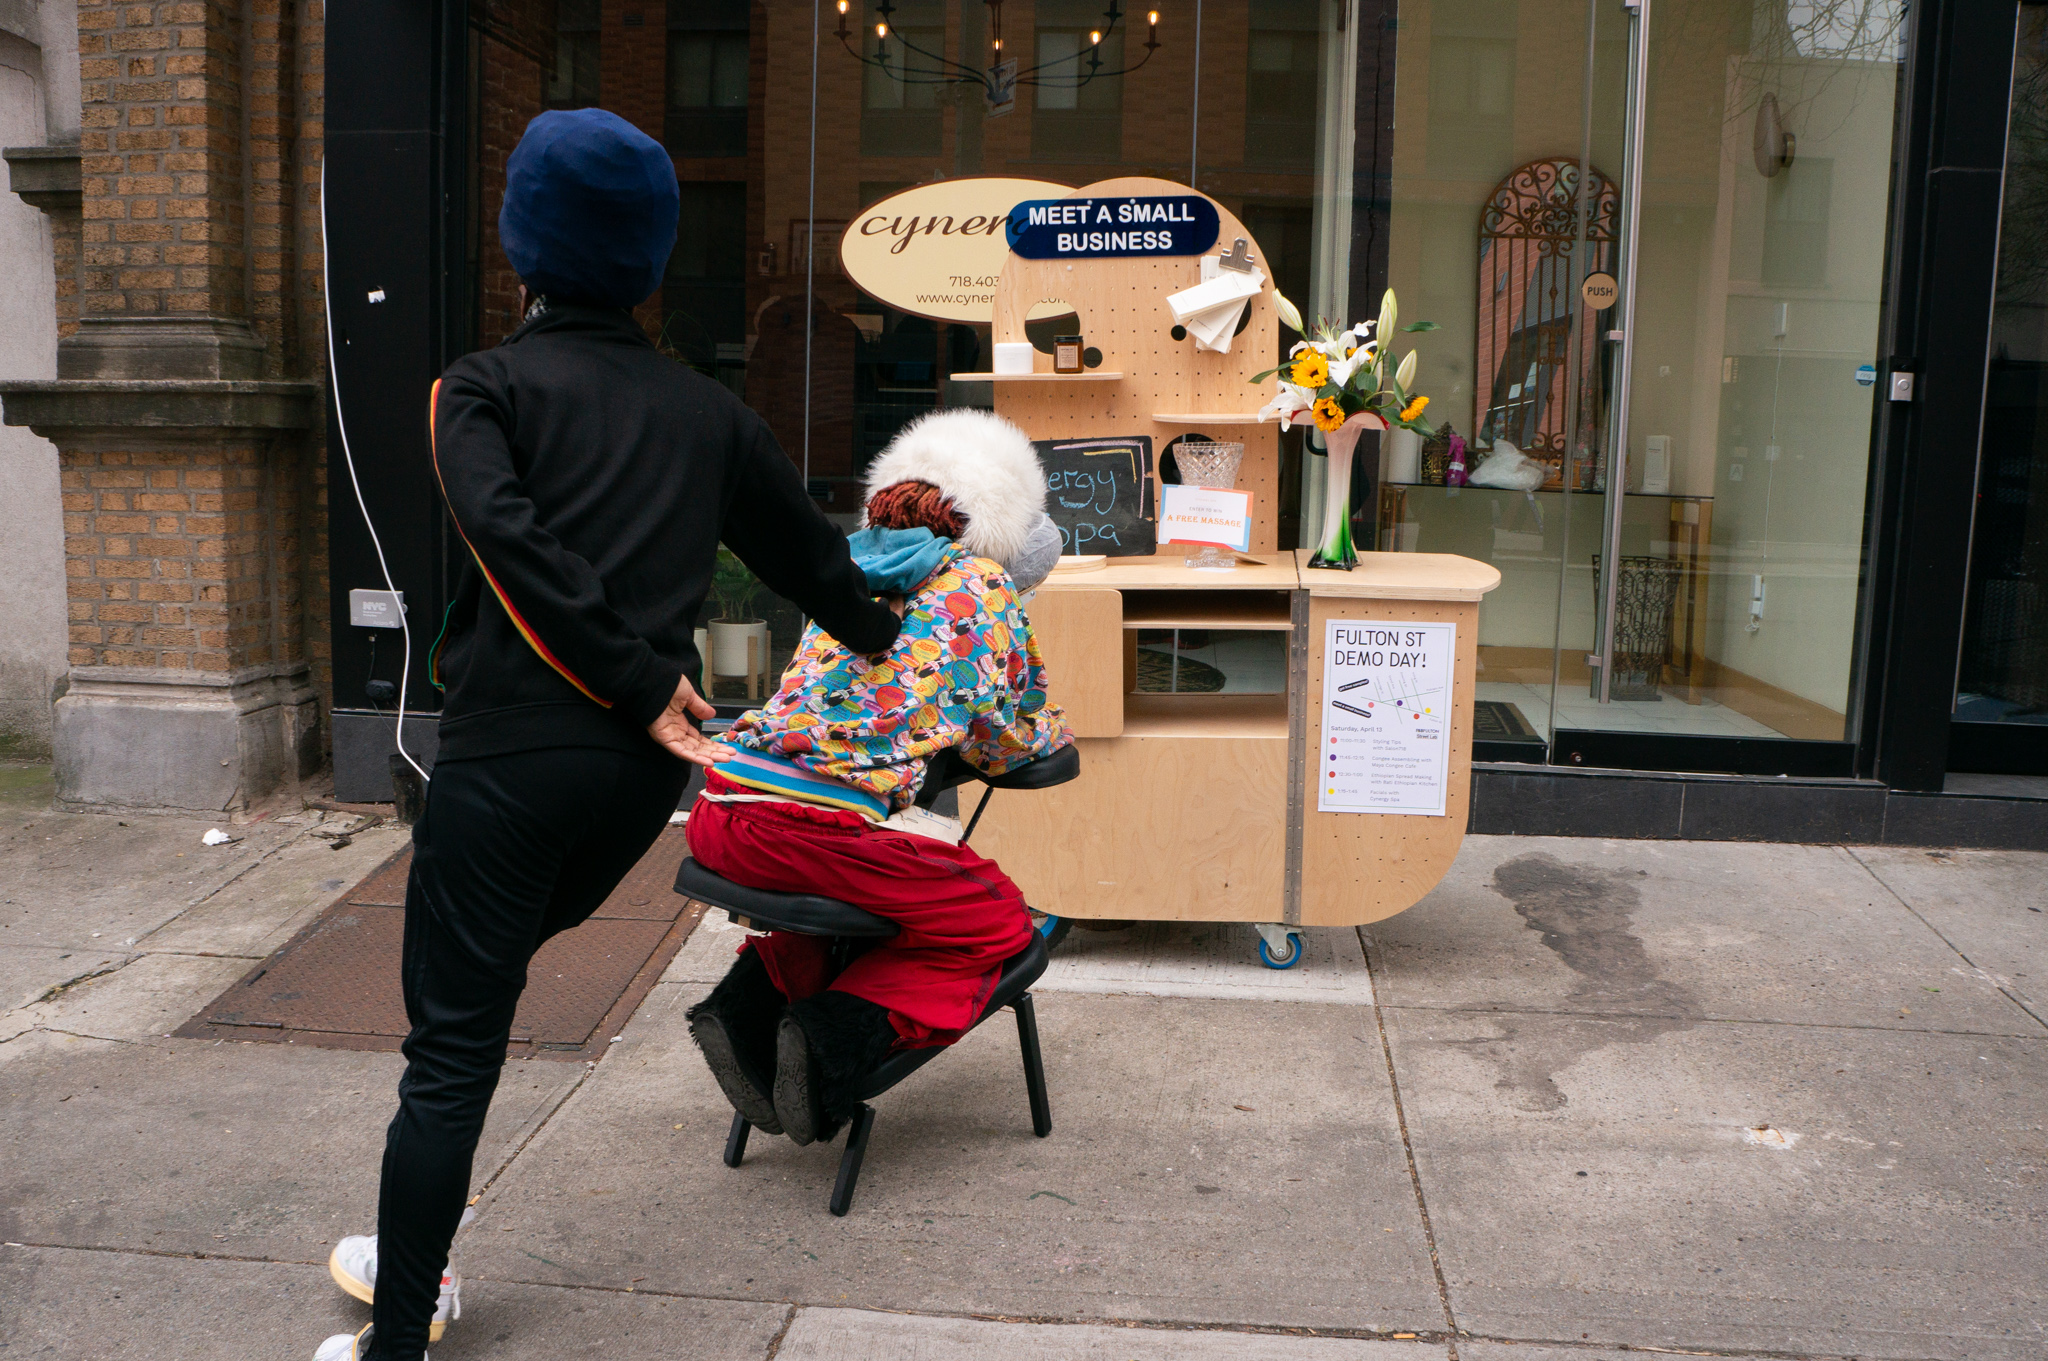 A masseur demonstrating a massage session on the street in front of the storefront.